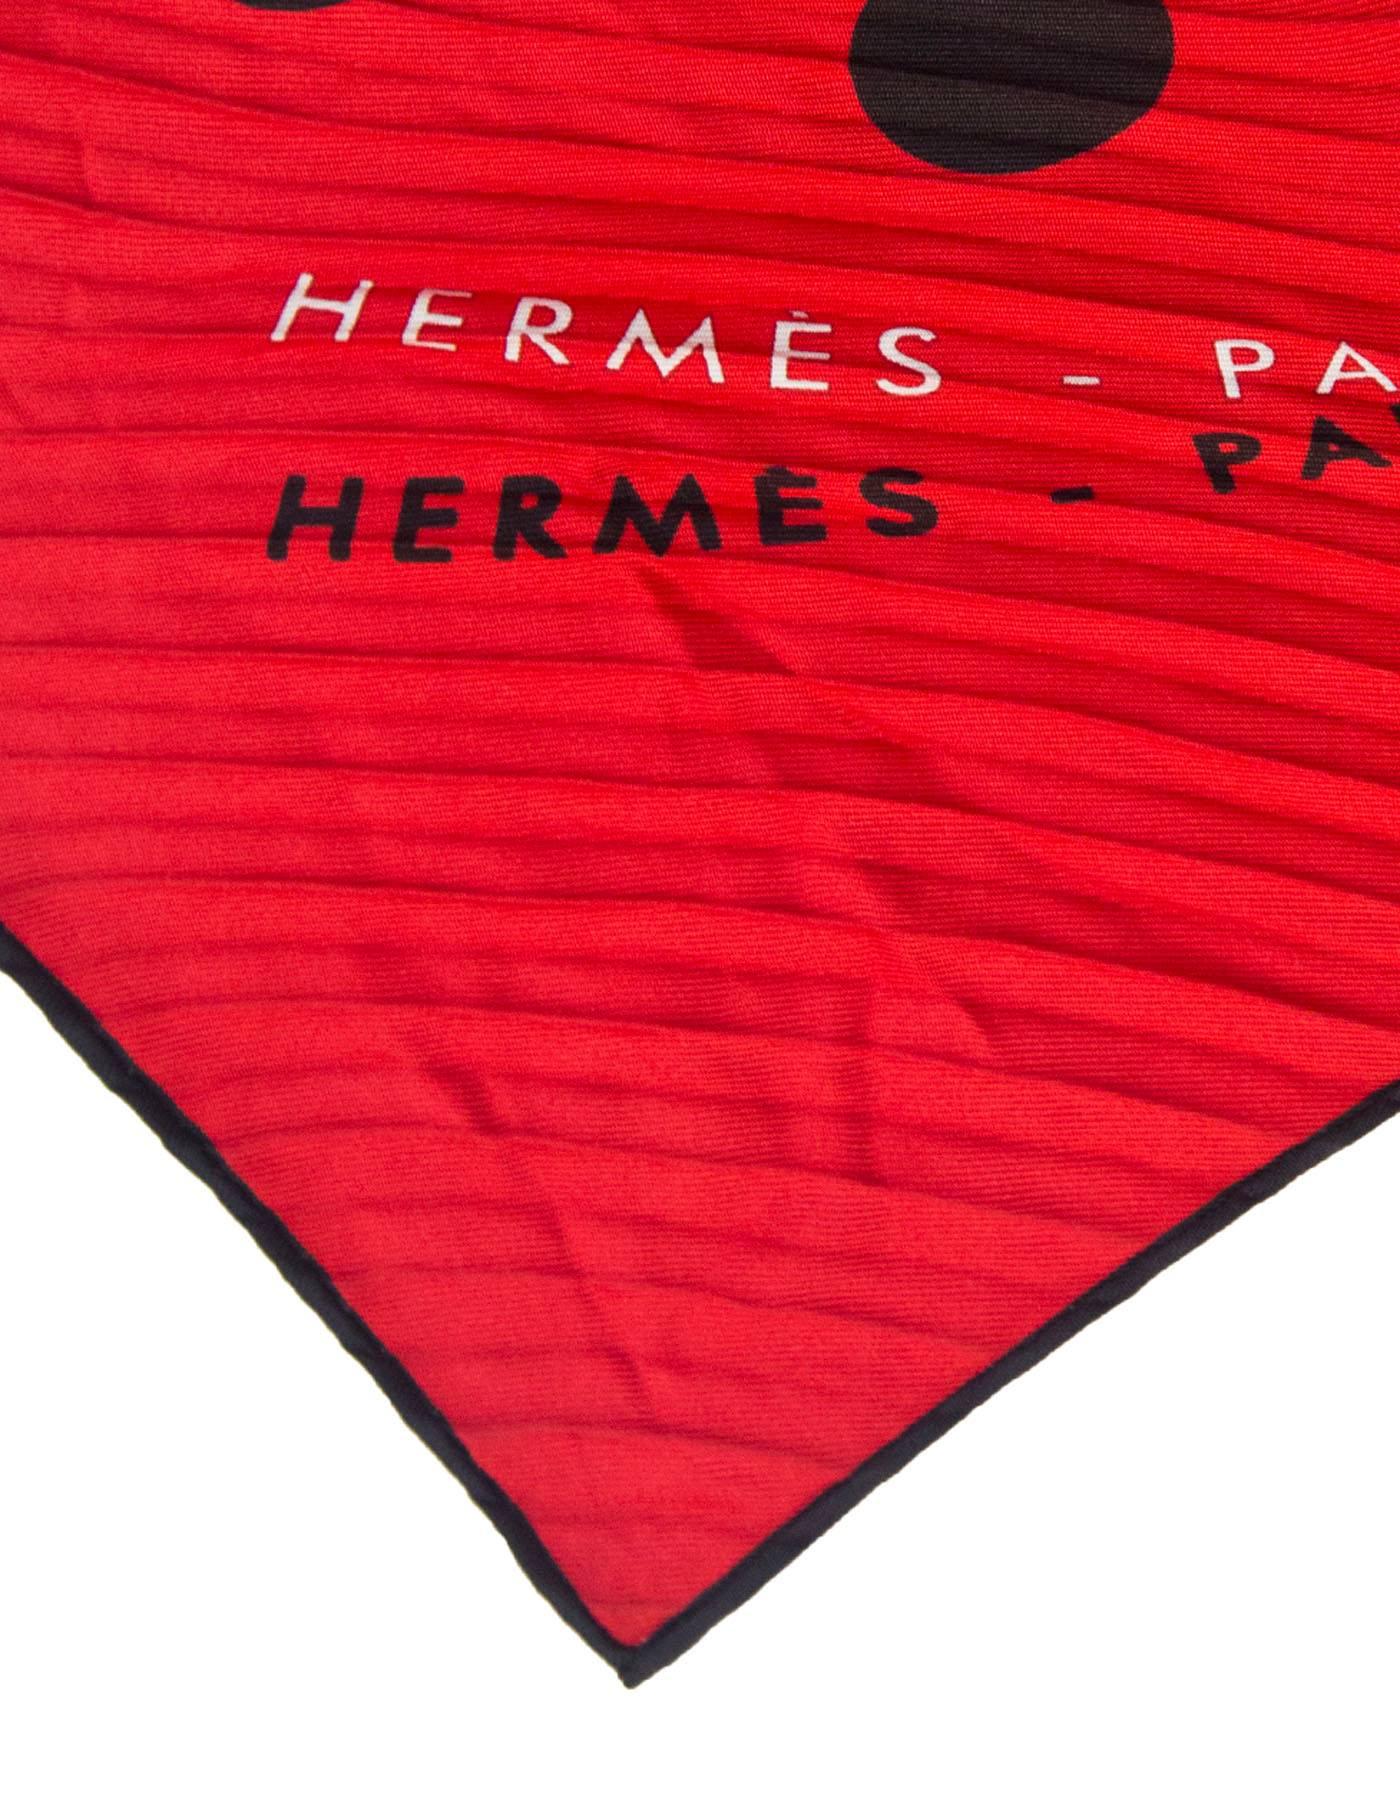 Hermes Red & Black Hola Flamenca Silk Plisse Pleated Scarf with Box 2